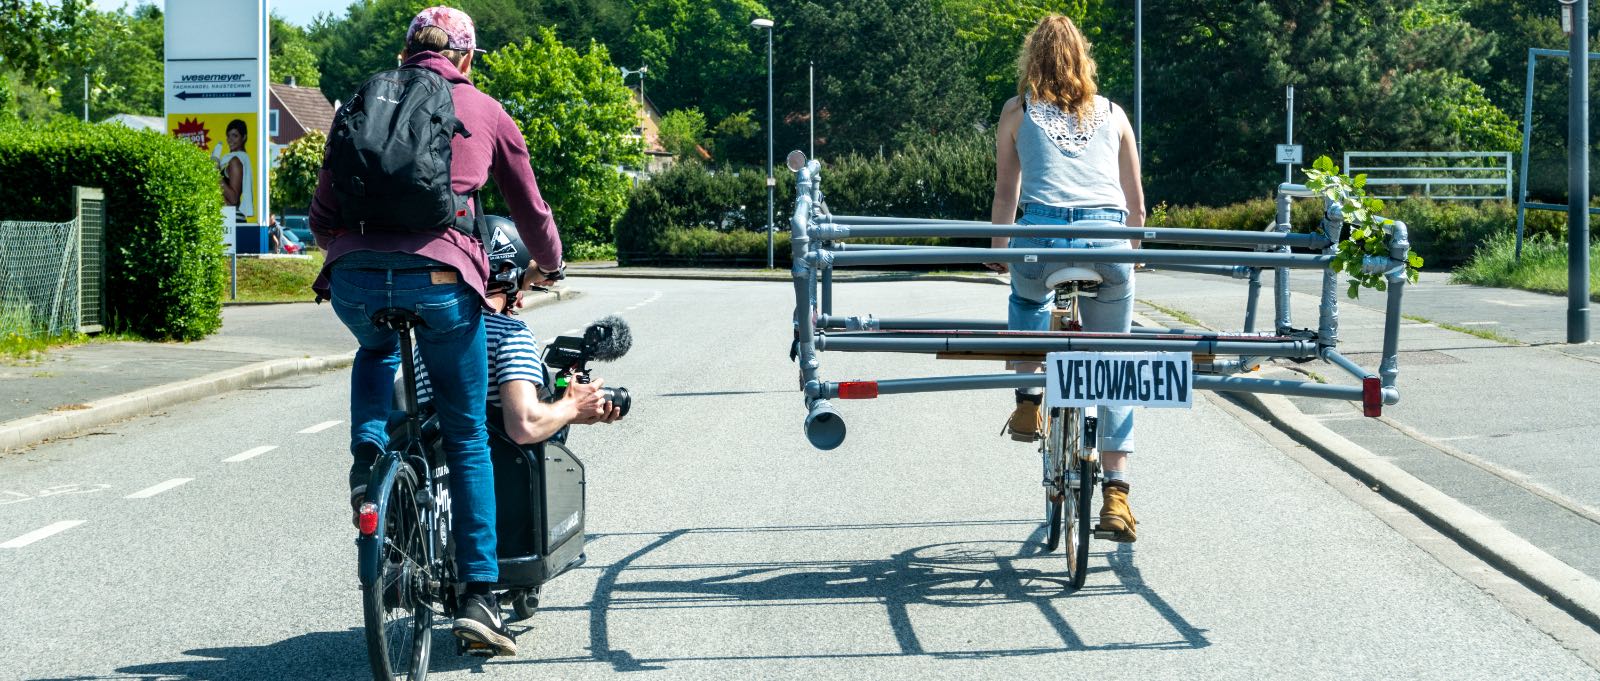 A bike with dimensions of a car is beeing filmed on the road.